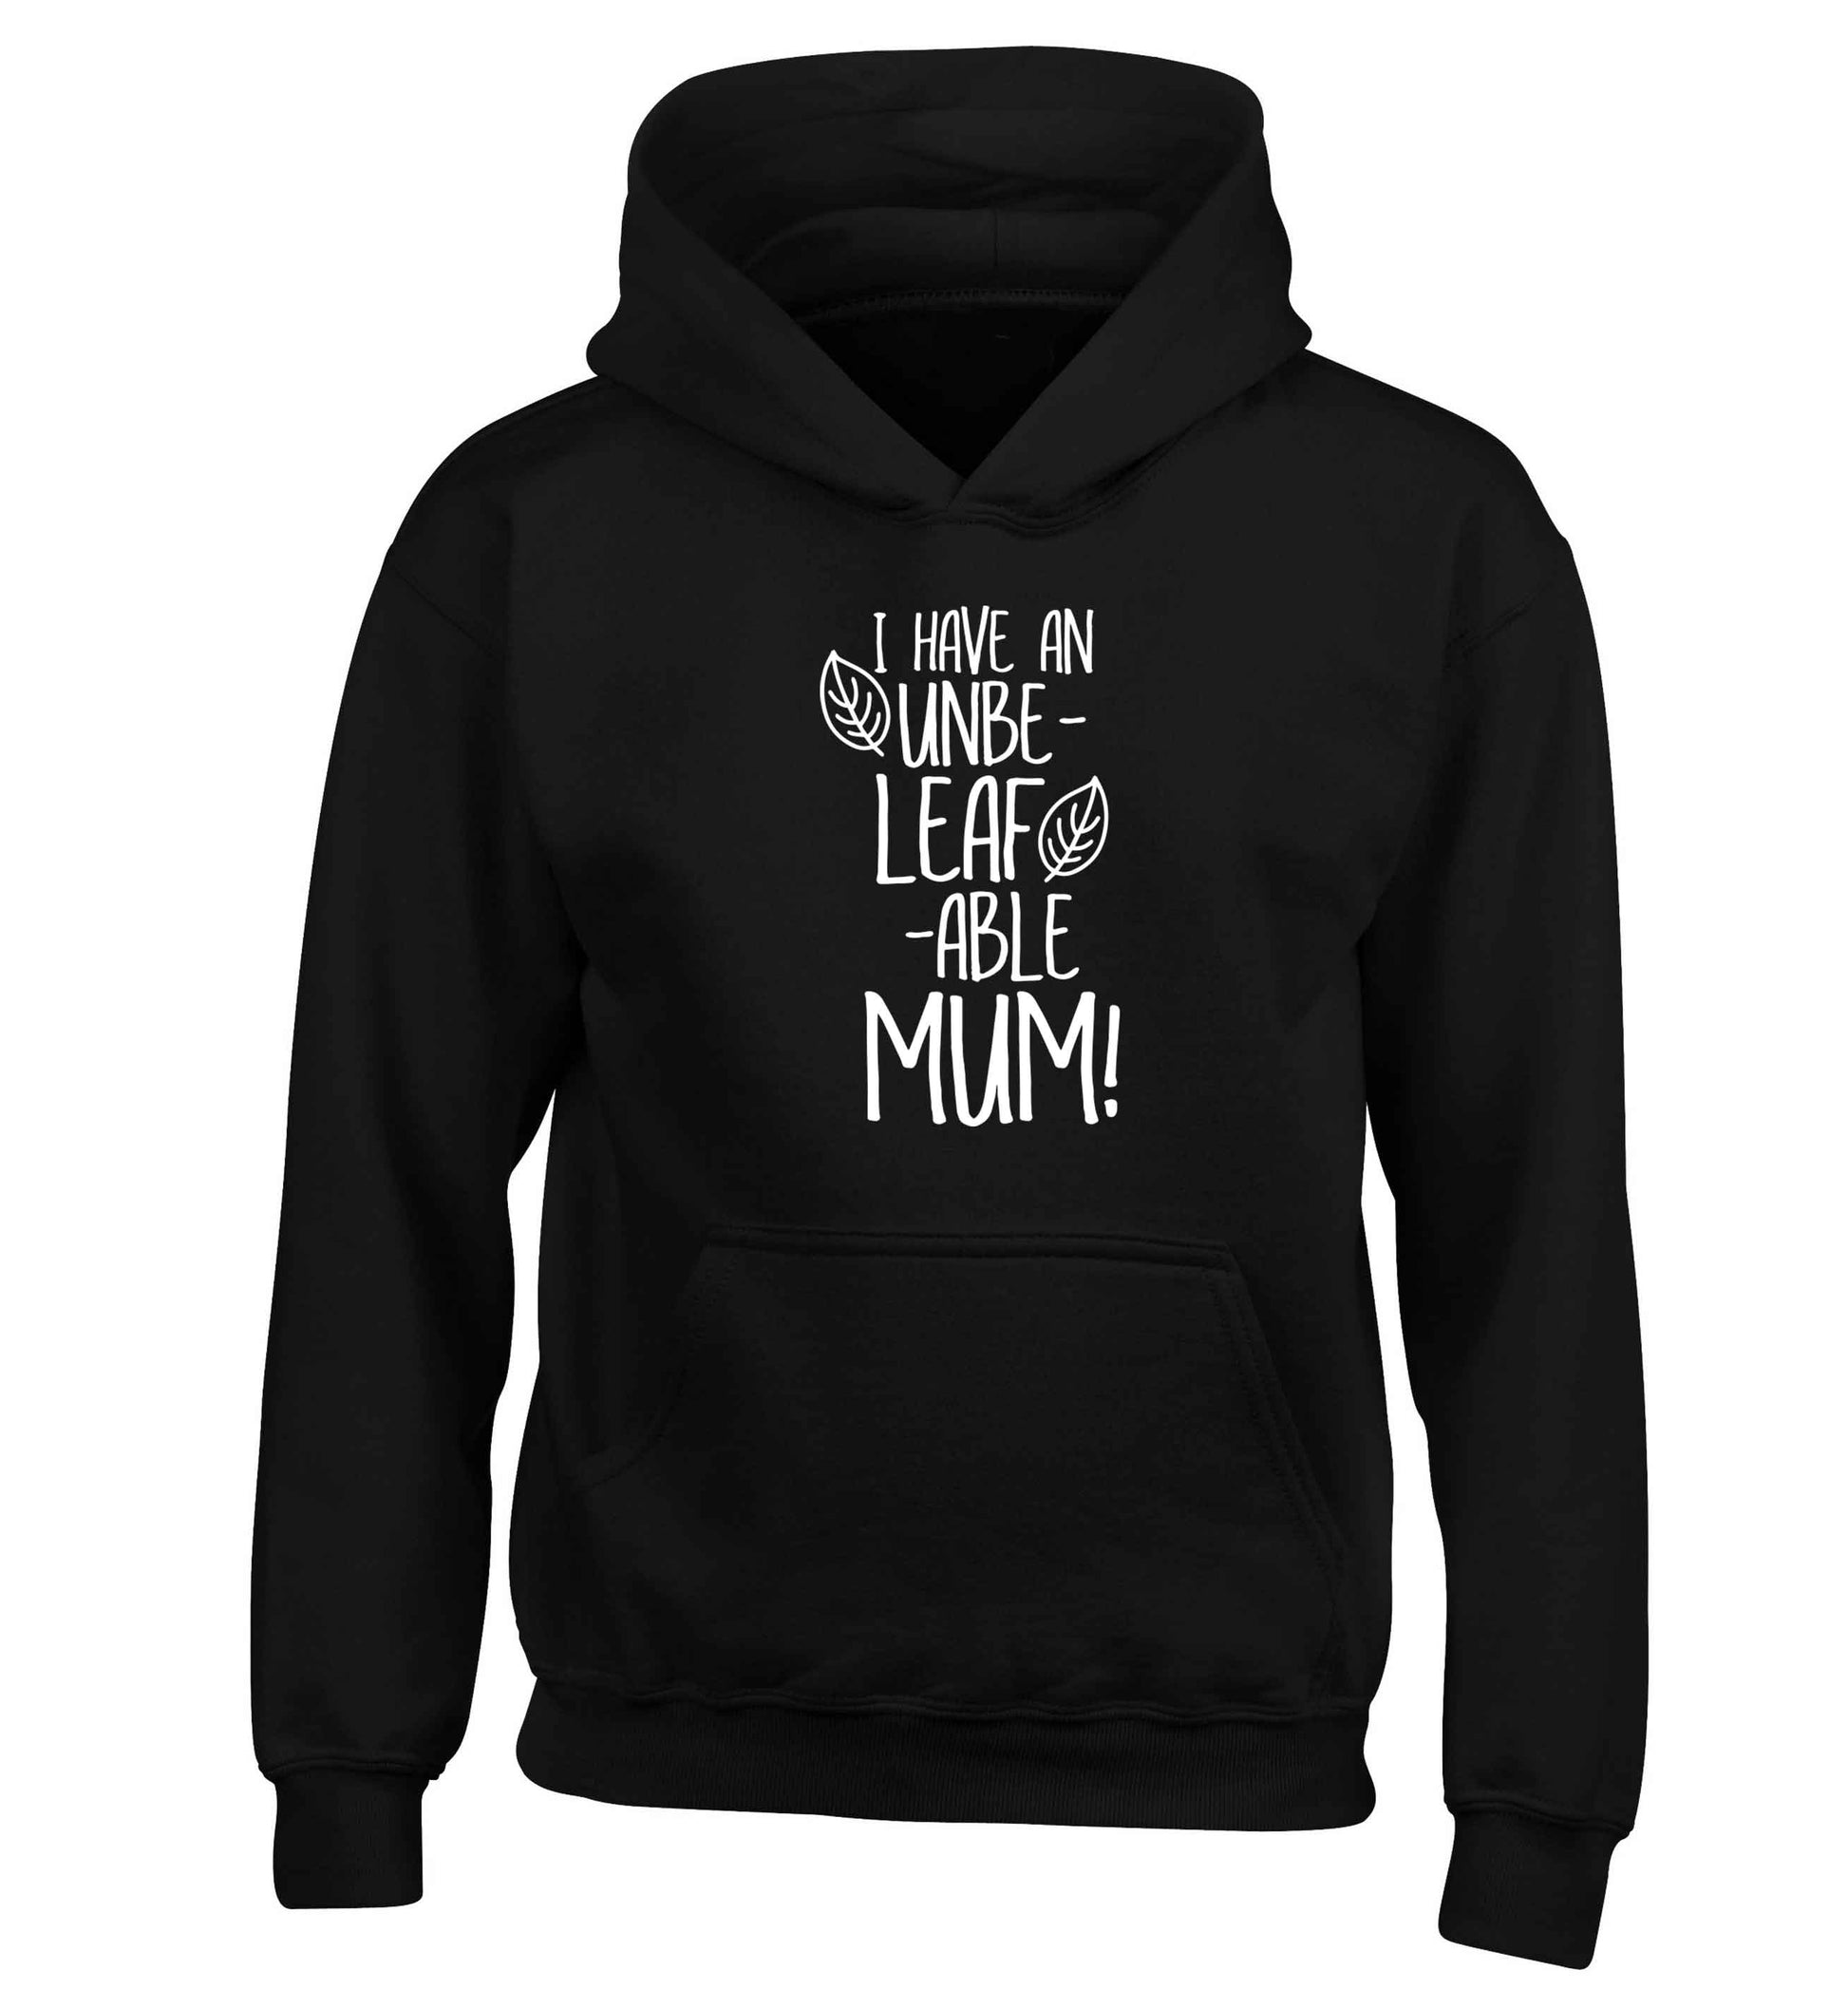 I have an unbeleafable mum! children's black hoodie 12-13 Years